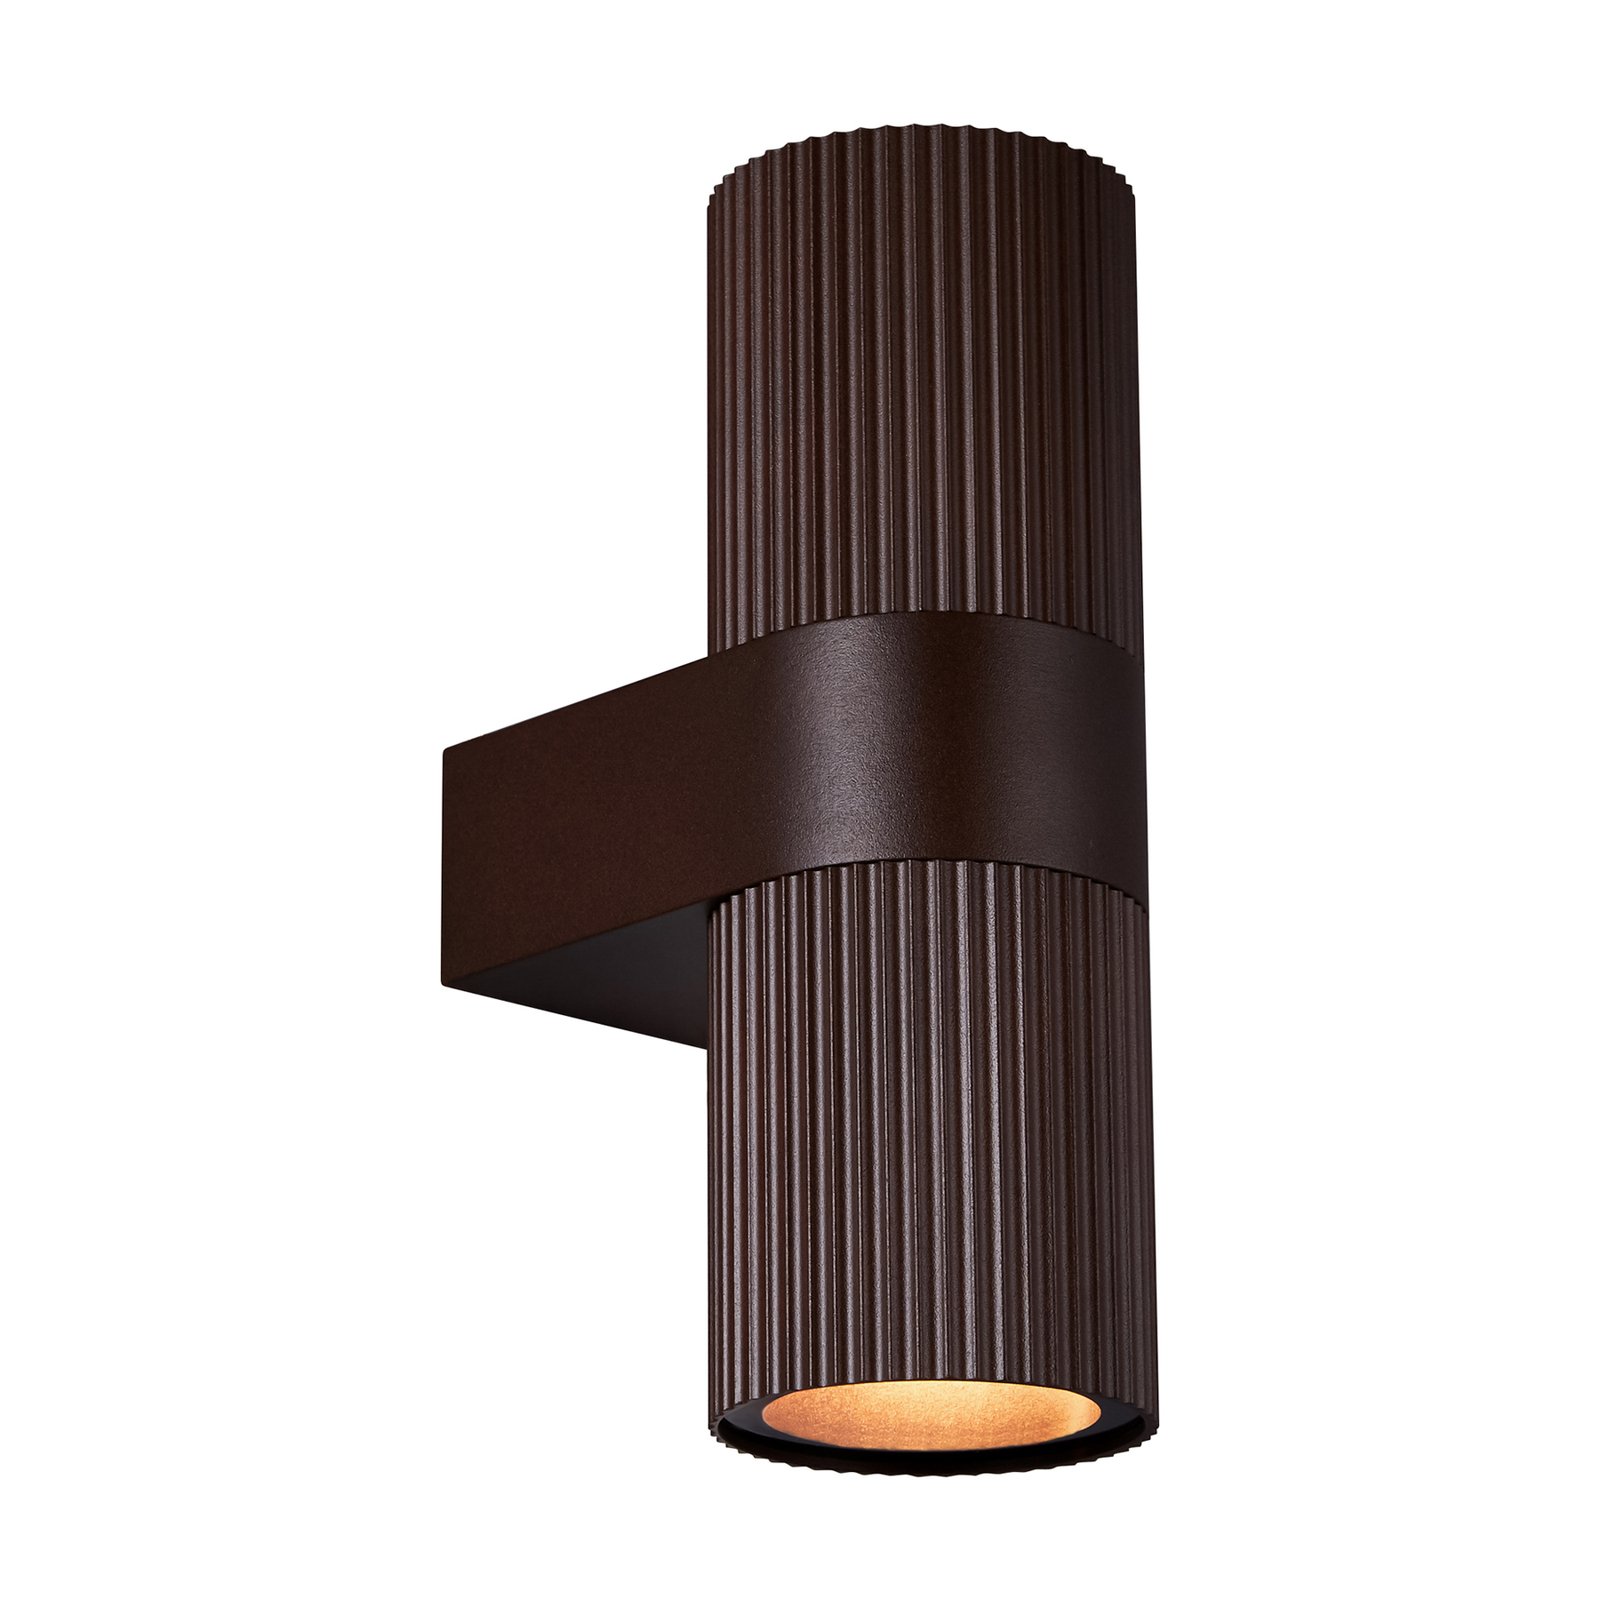 Buitenwandlamp Kyklop Ripple up/down, roest